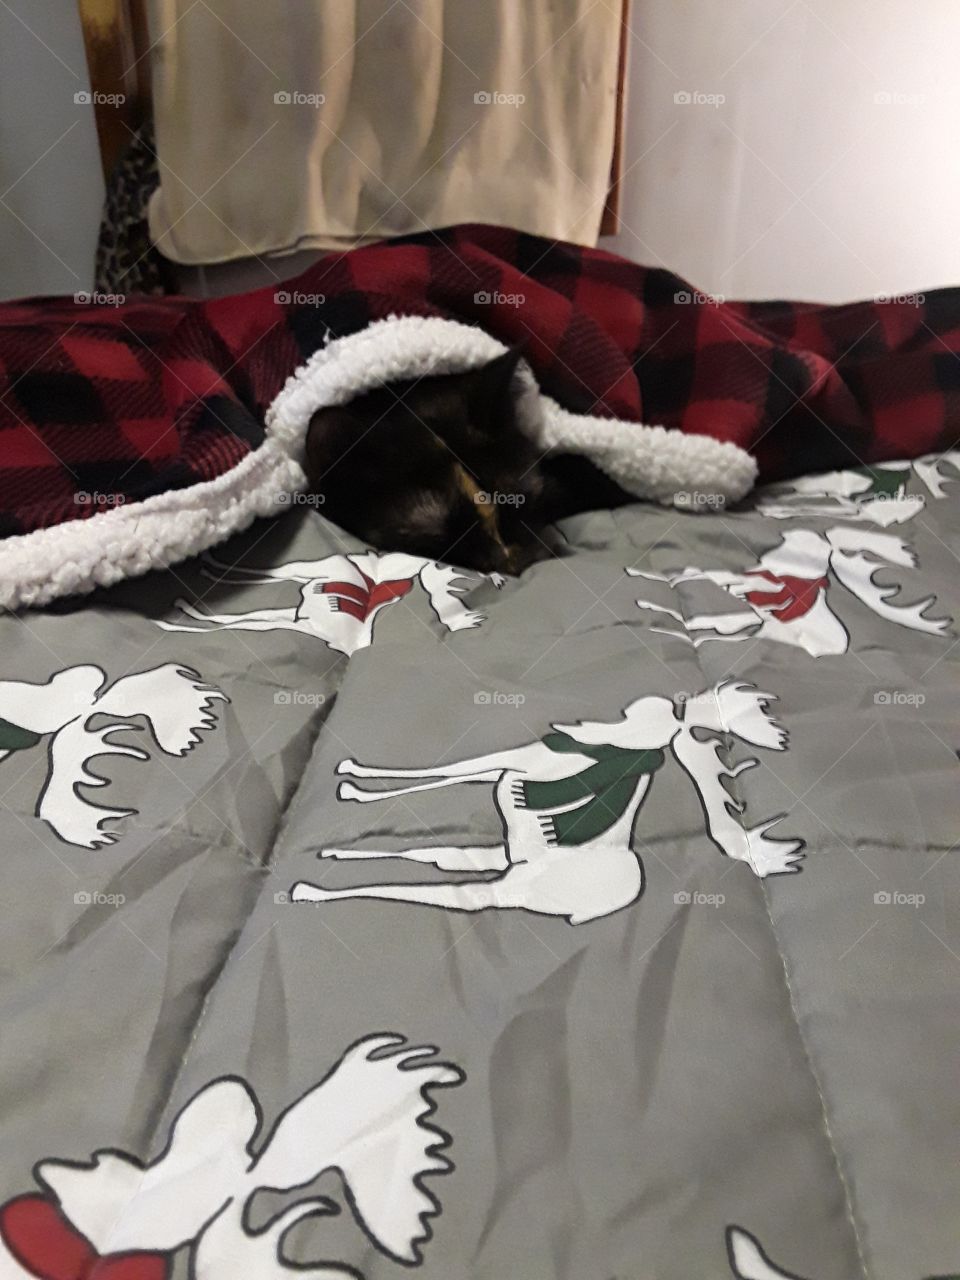 all tucked in